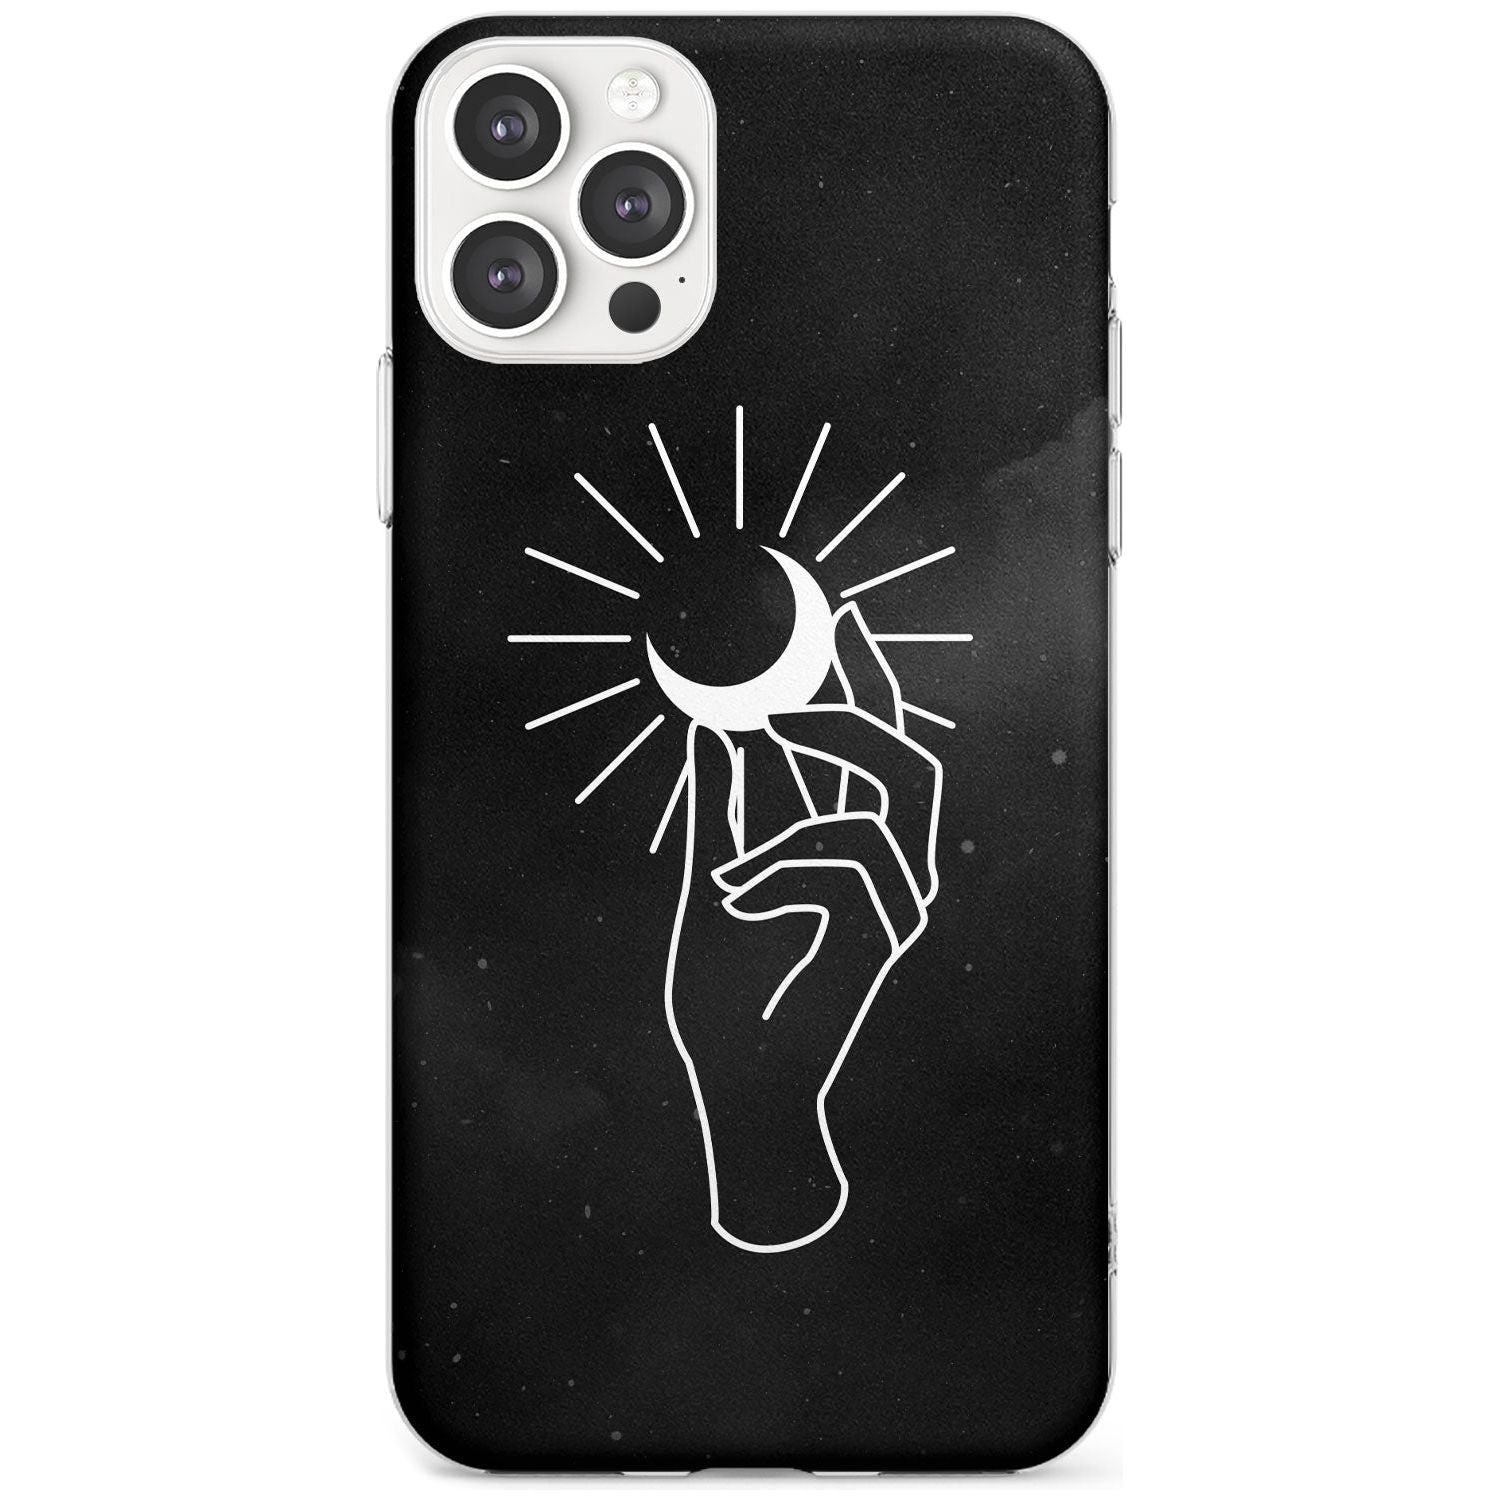 Hand Holding Moon Black Impact Phone Case for iPhone 11 Pro Max